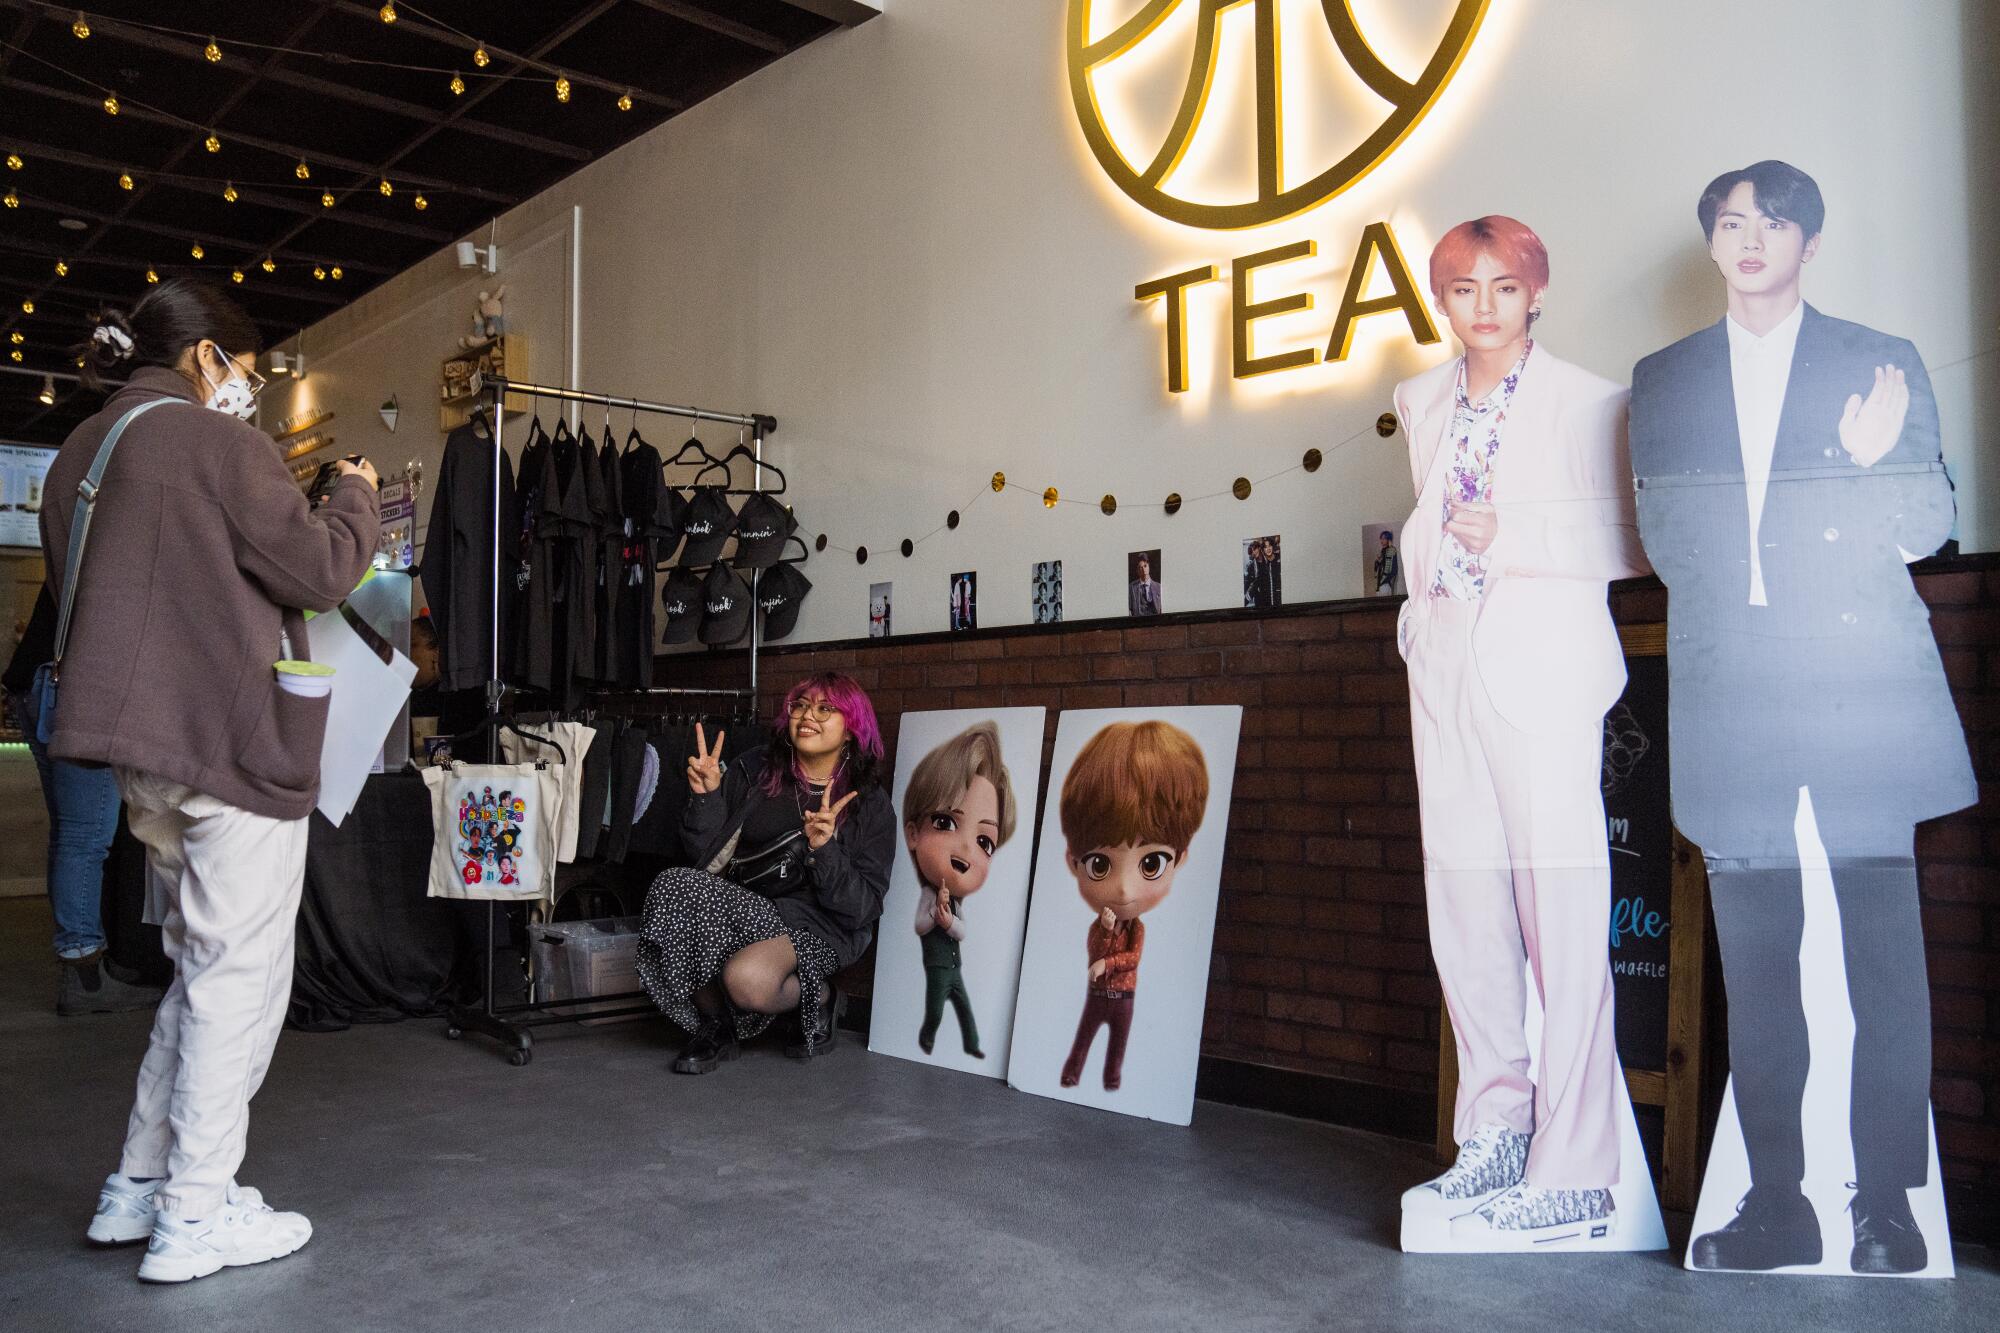 People pose for a photo squatting next to K-pop decor. Two standees depict K-pop artists. 